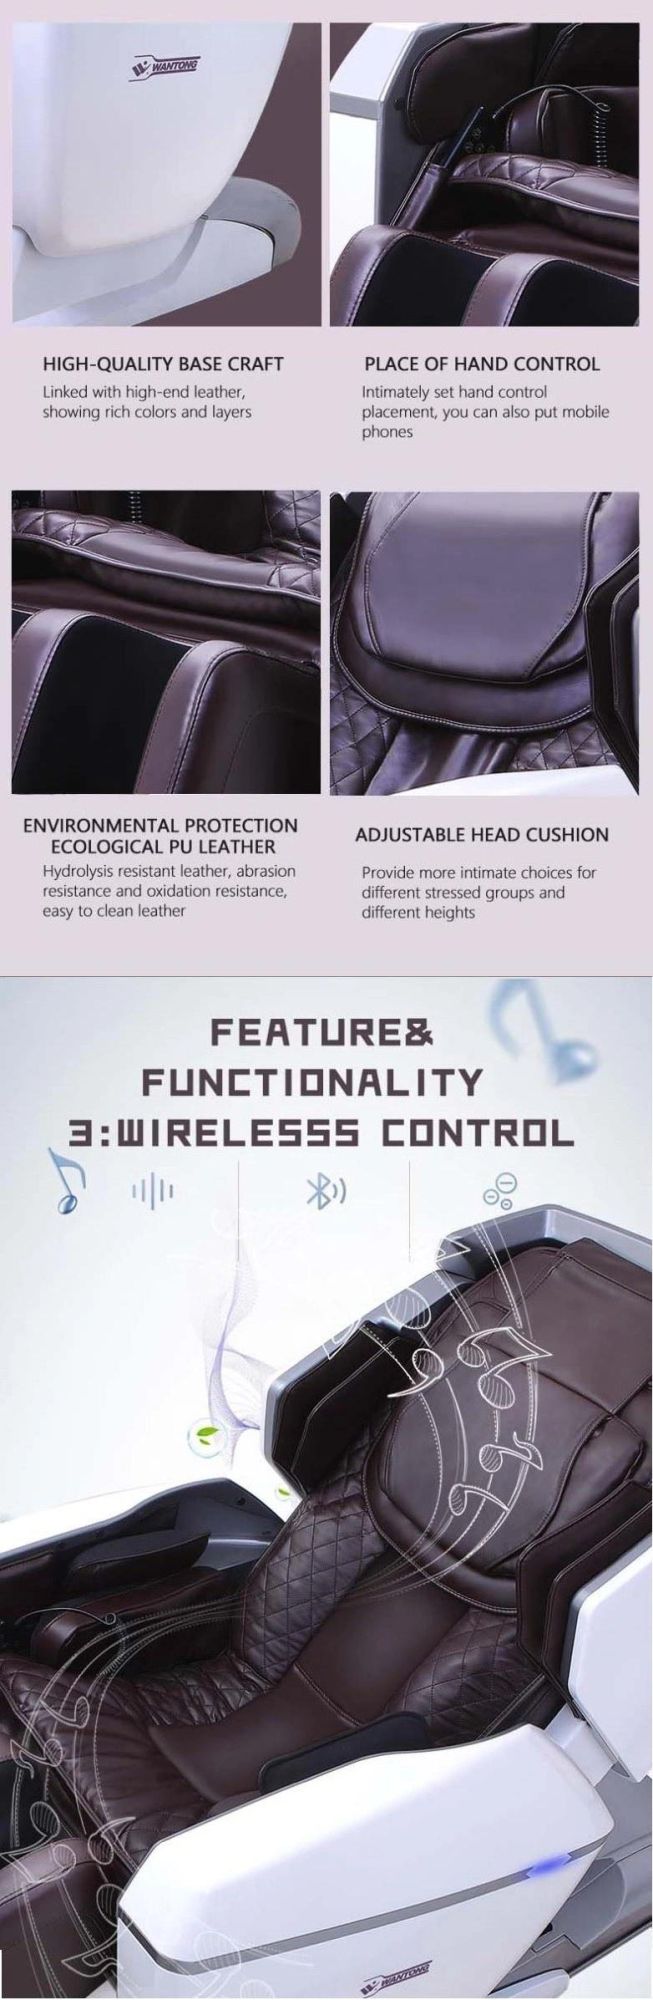 Multifunctional Vibration Comfortable Whole Body Massage Chair for Sale